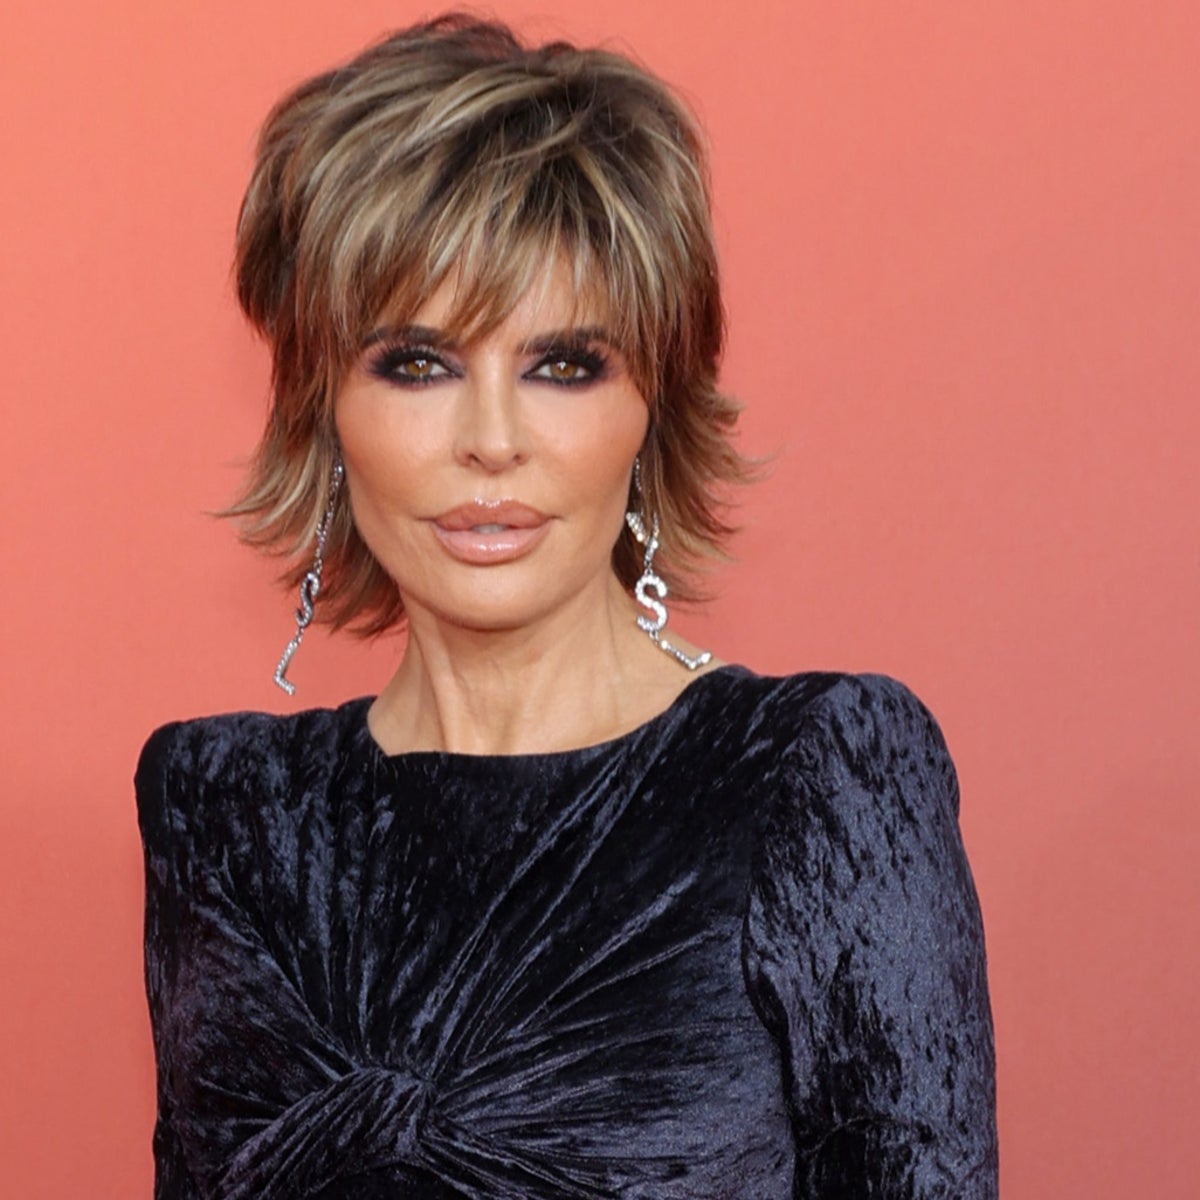 Lisa Rinna says recent 'rage' is from grief after mother's death, critics